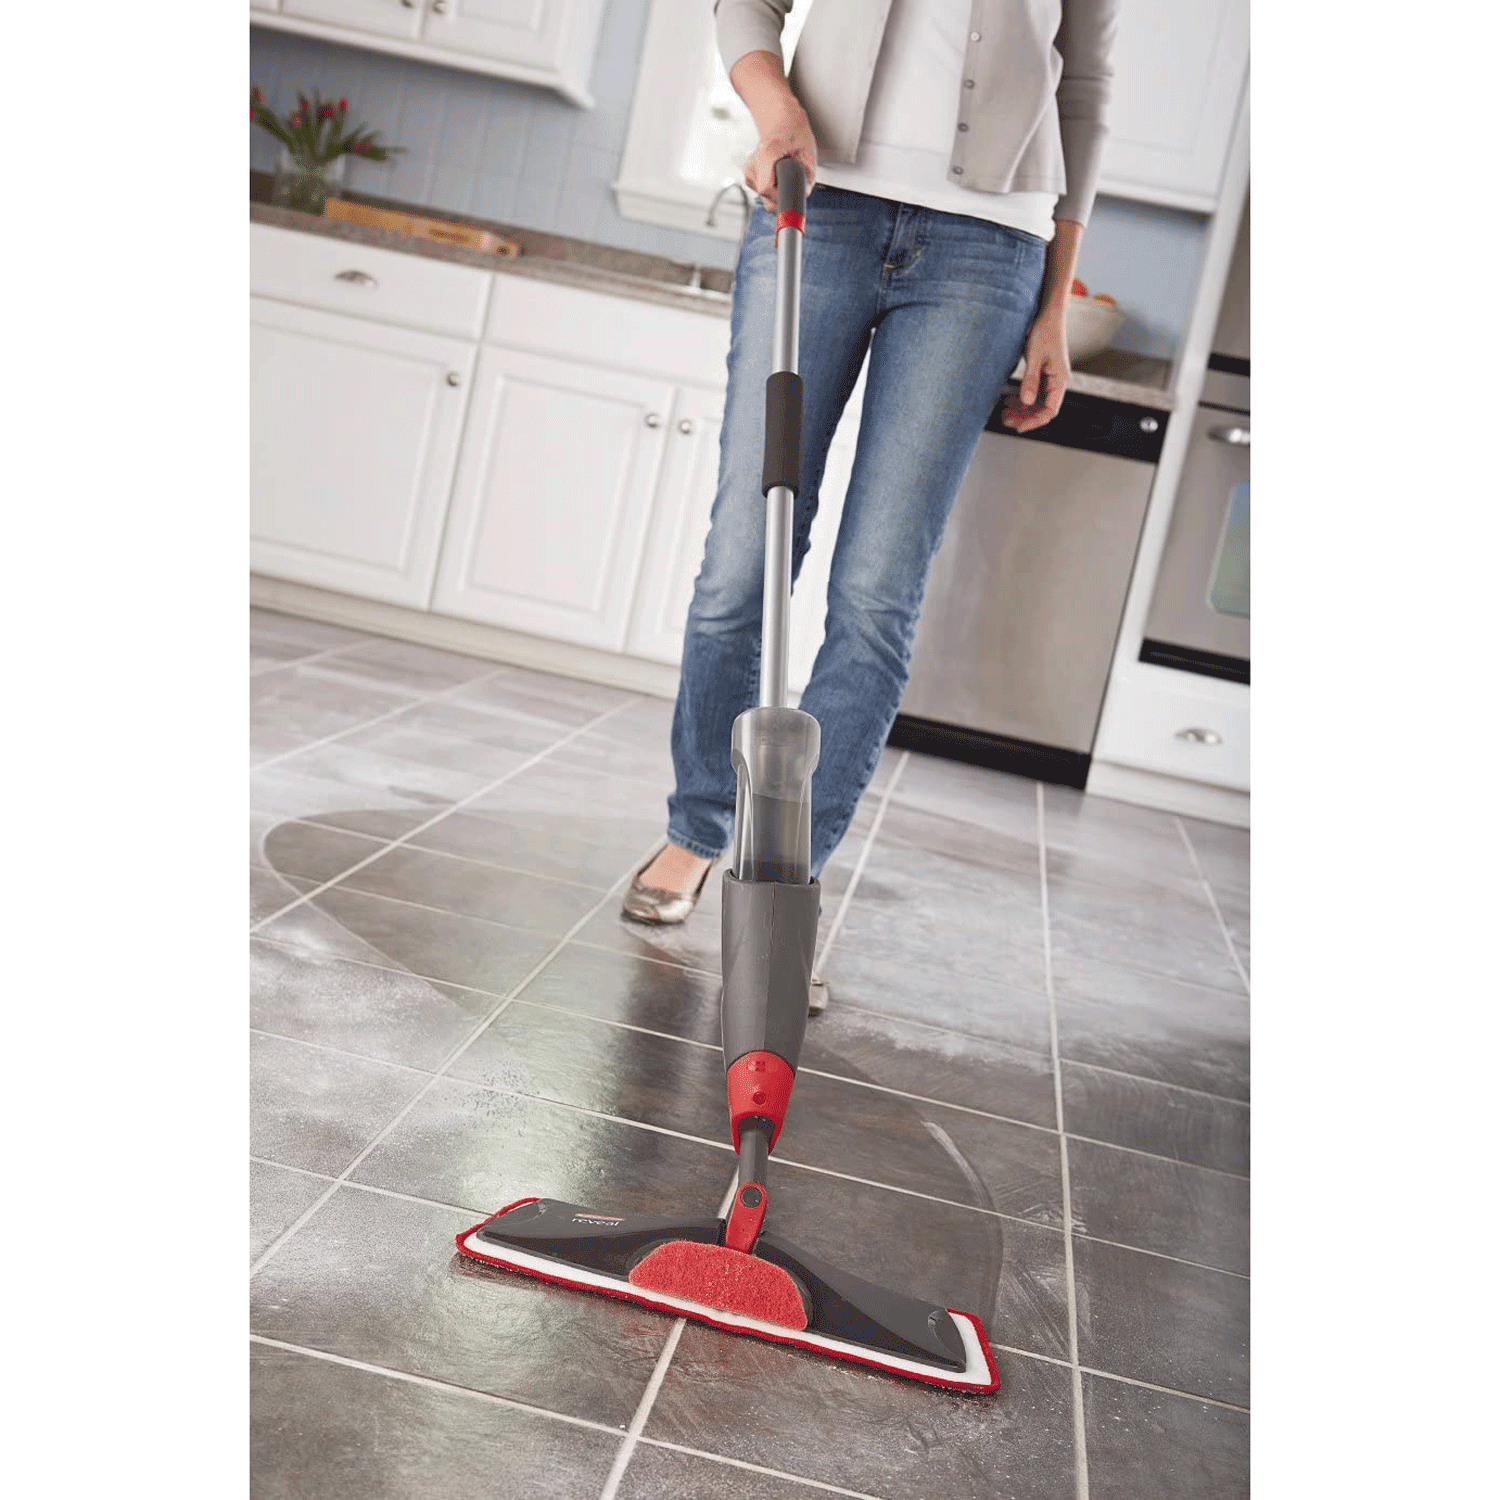 Rubbermaid Reveal Spray Mop Replacement Bottle, Leak Free, Refillable  Bottle for Mopping Cleaning on Multi-Purpose Surface, Clear/Red